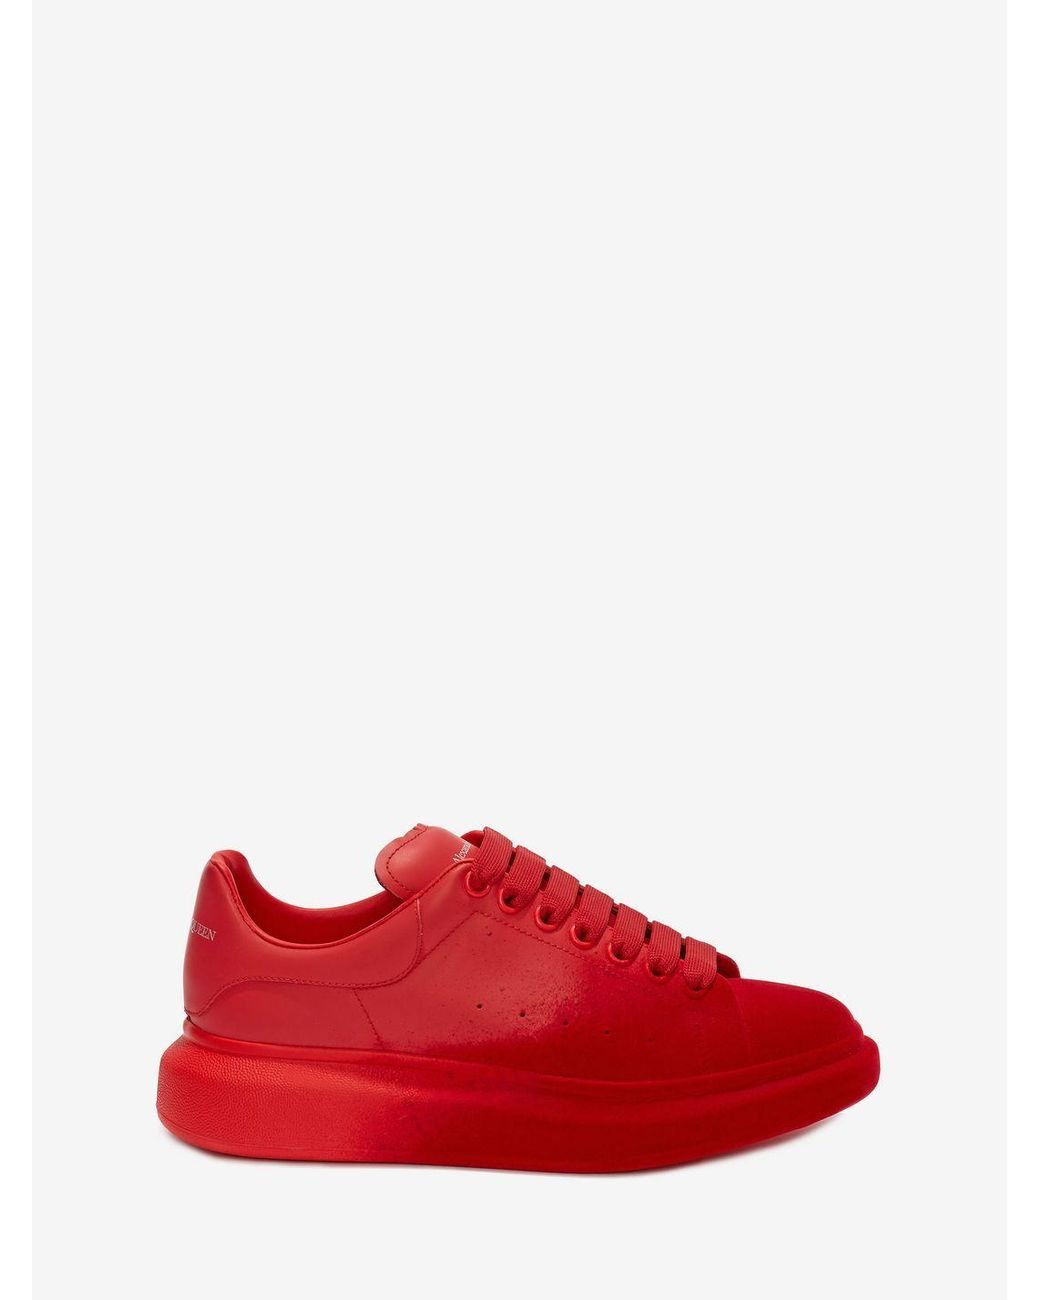 Alexander McQueen Leather Oversized Sneaker in Red for Men - Save 3% - Lyst